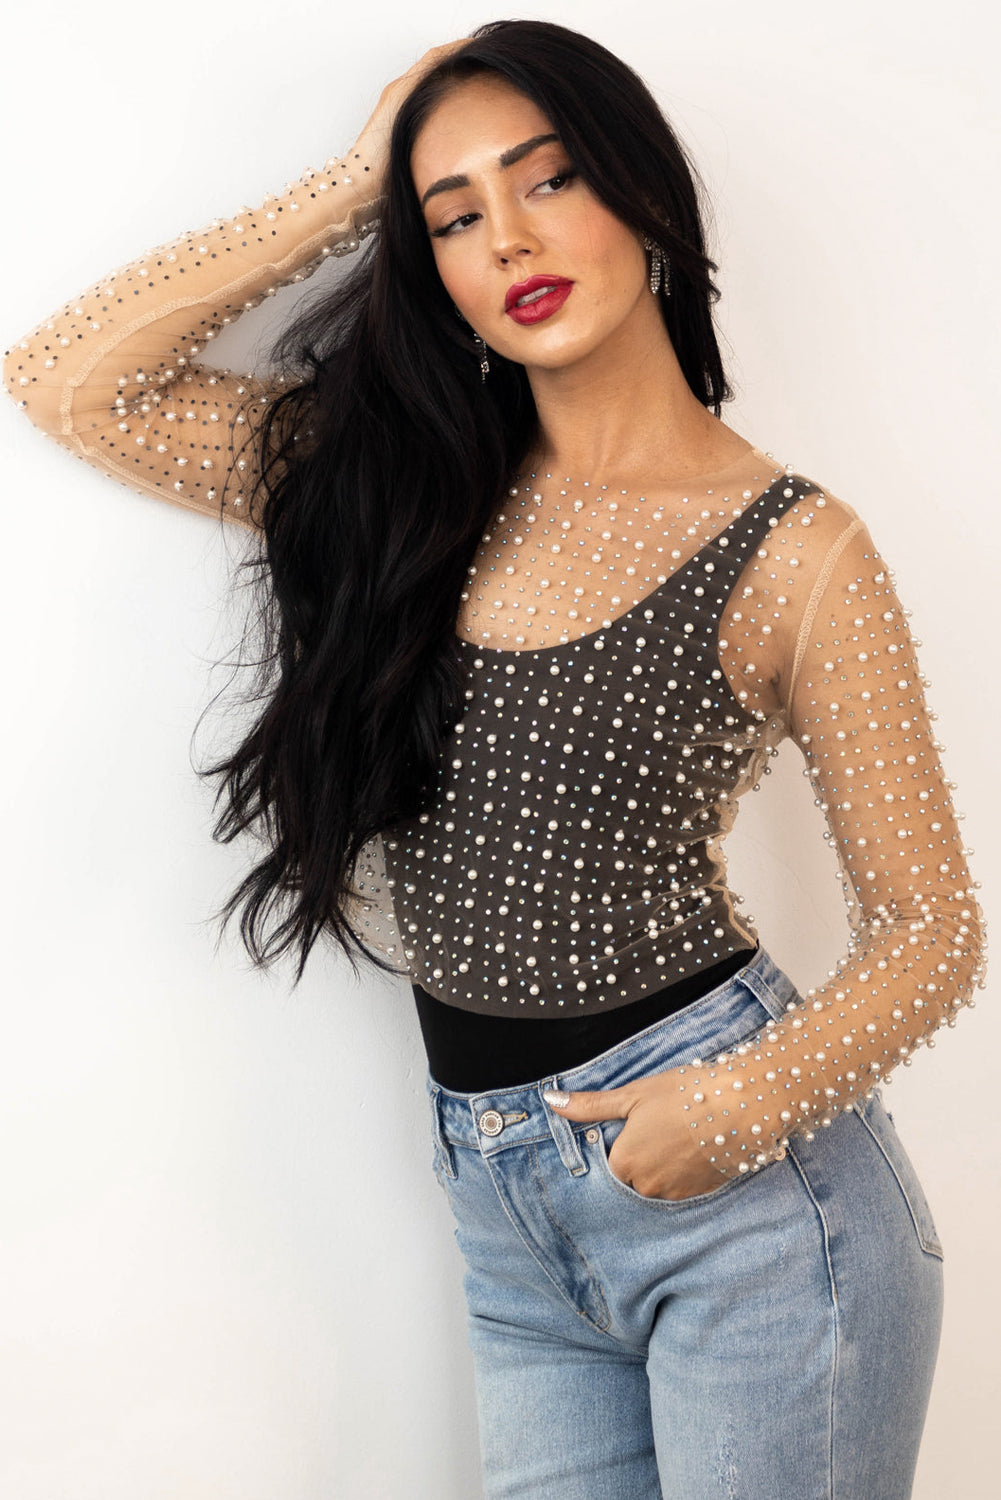 Black Pearl and Rhinestone Decor Sheer Cropped Top without Camisole